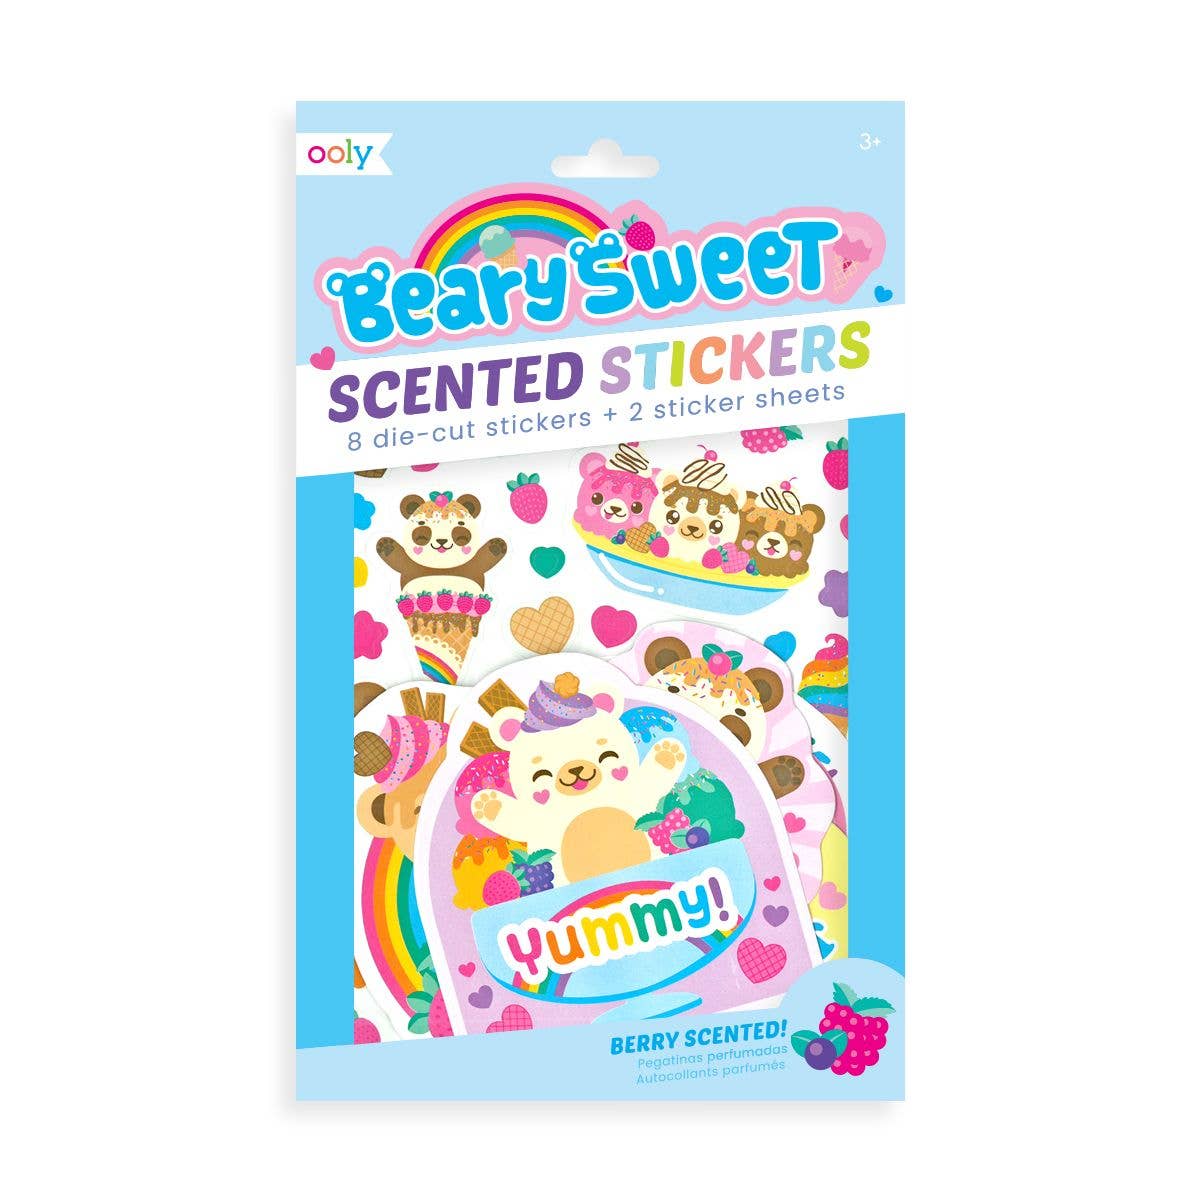 Beary Sweet Scented Stickers Tea for Three: A Children's Boutique